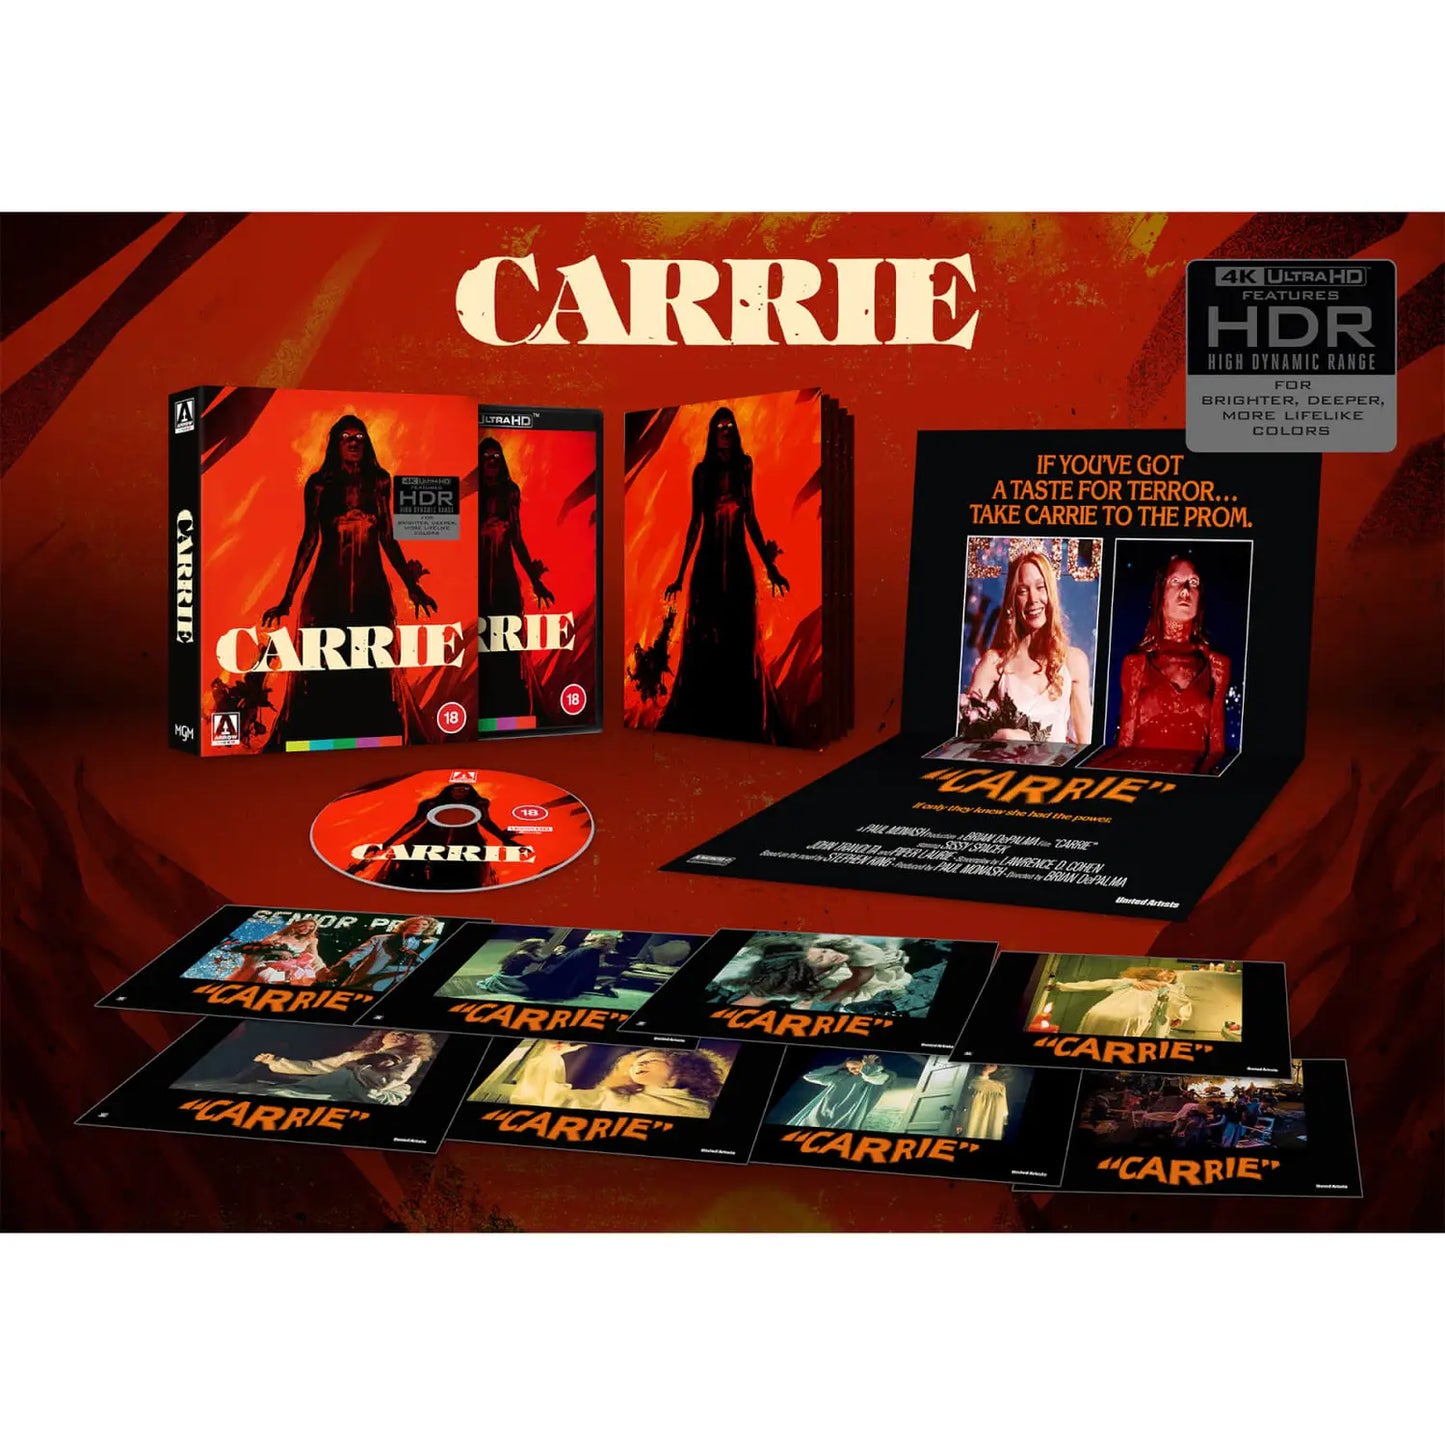 Carrie Limited Edition 4K UHD with Slip (Arrow UK)